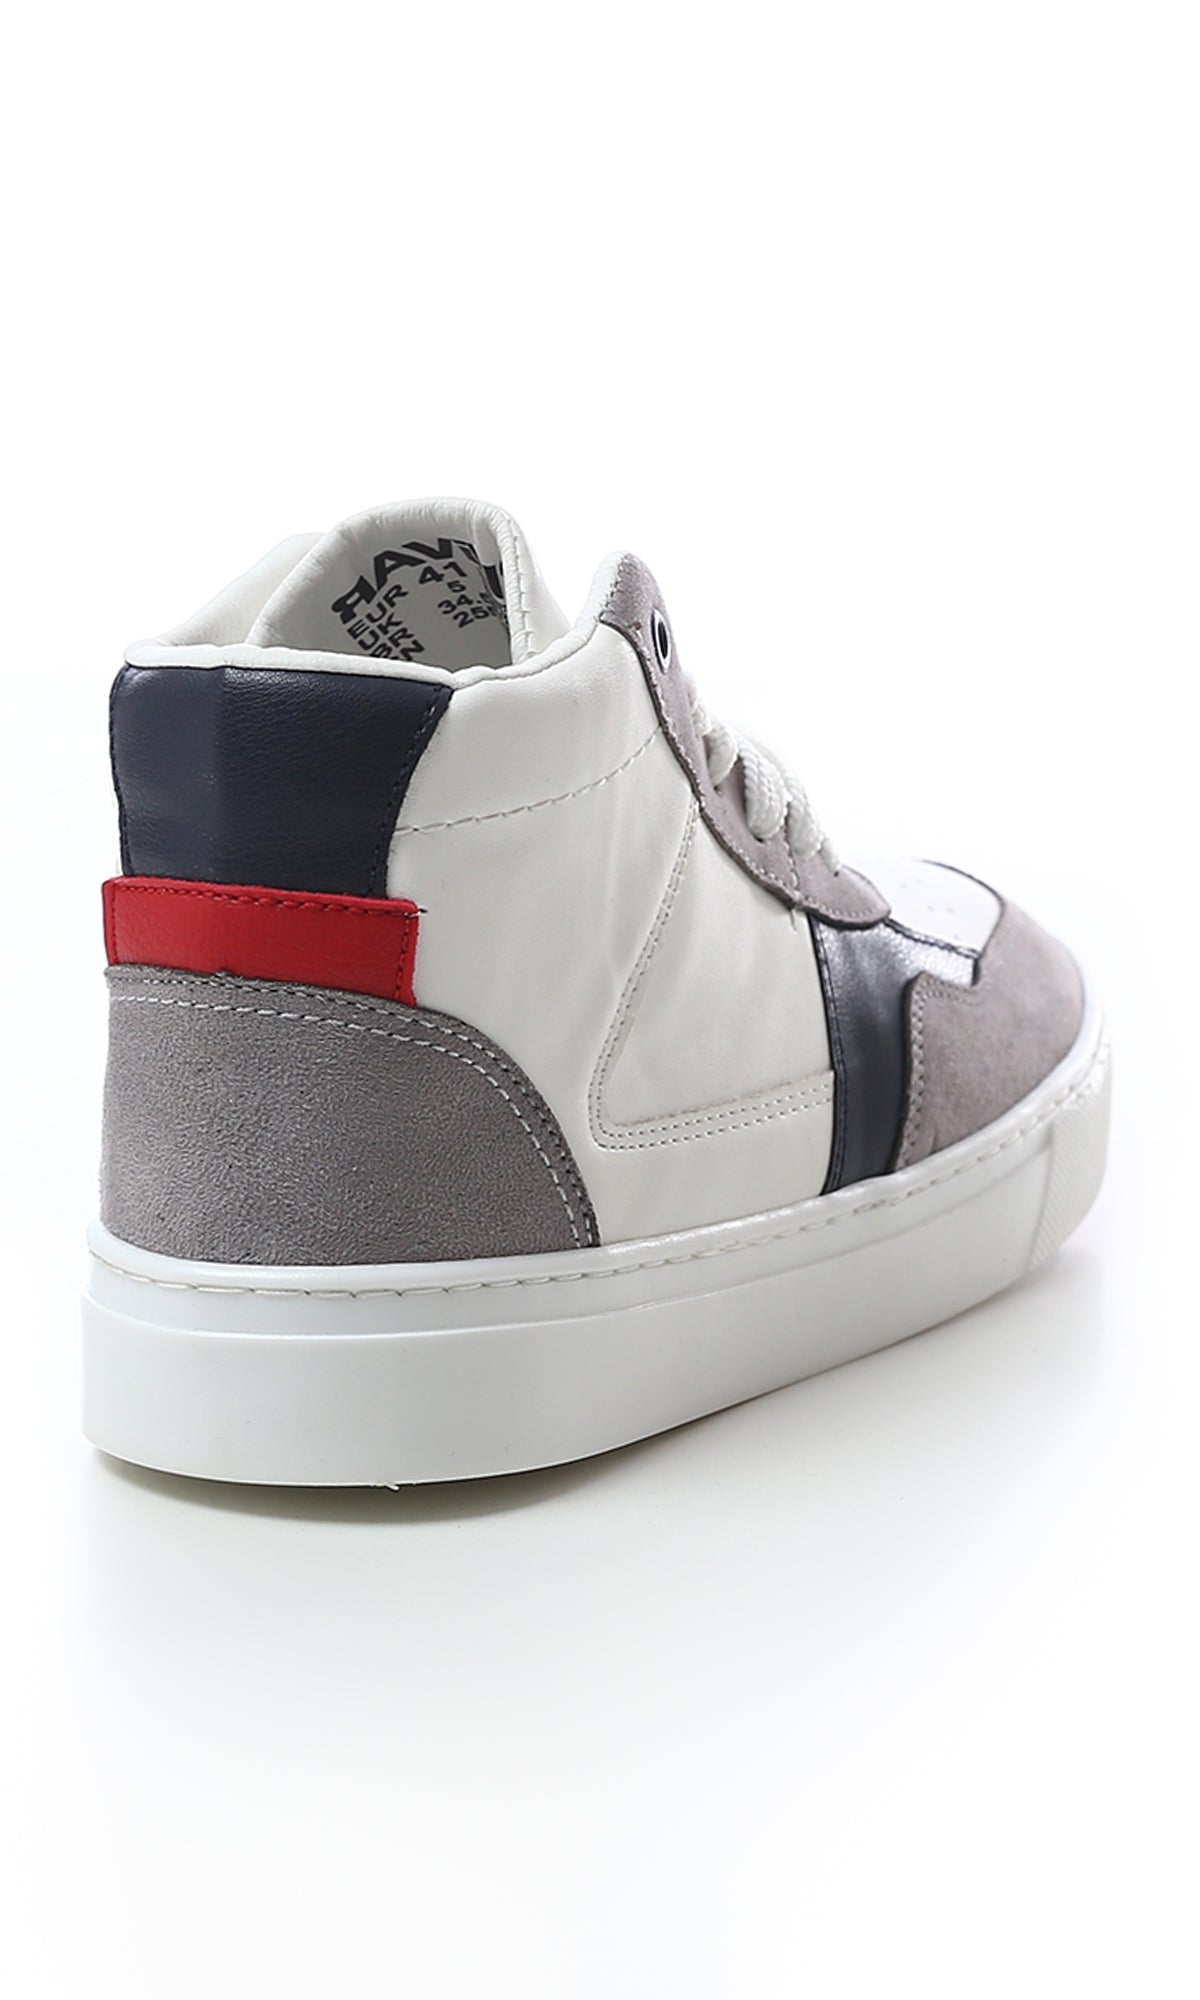 O180408 Tri-Tone Leather High-Neck Casual Shoes - White, Grey Navy Blue